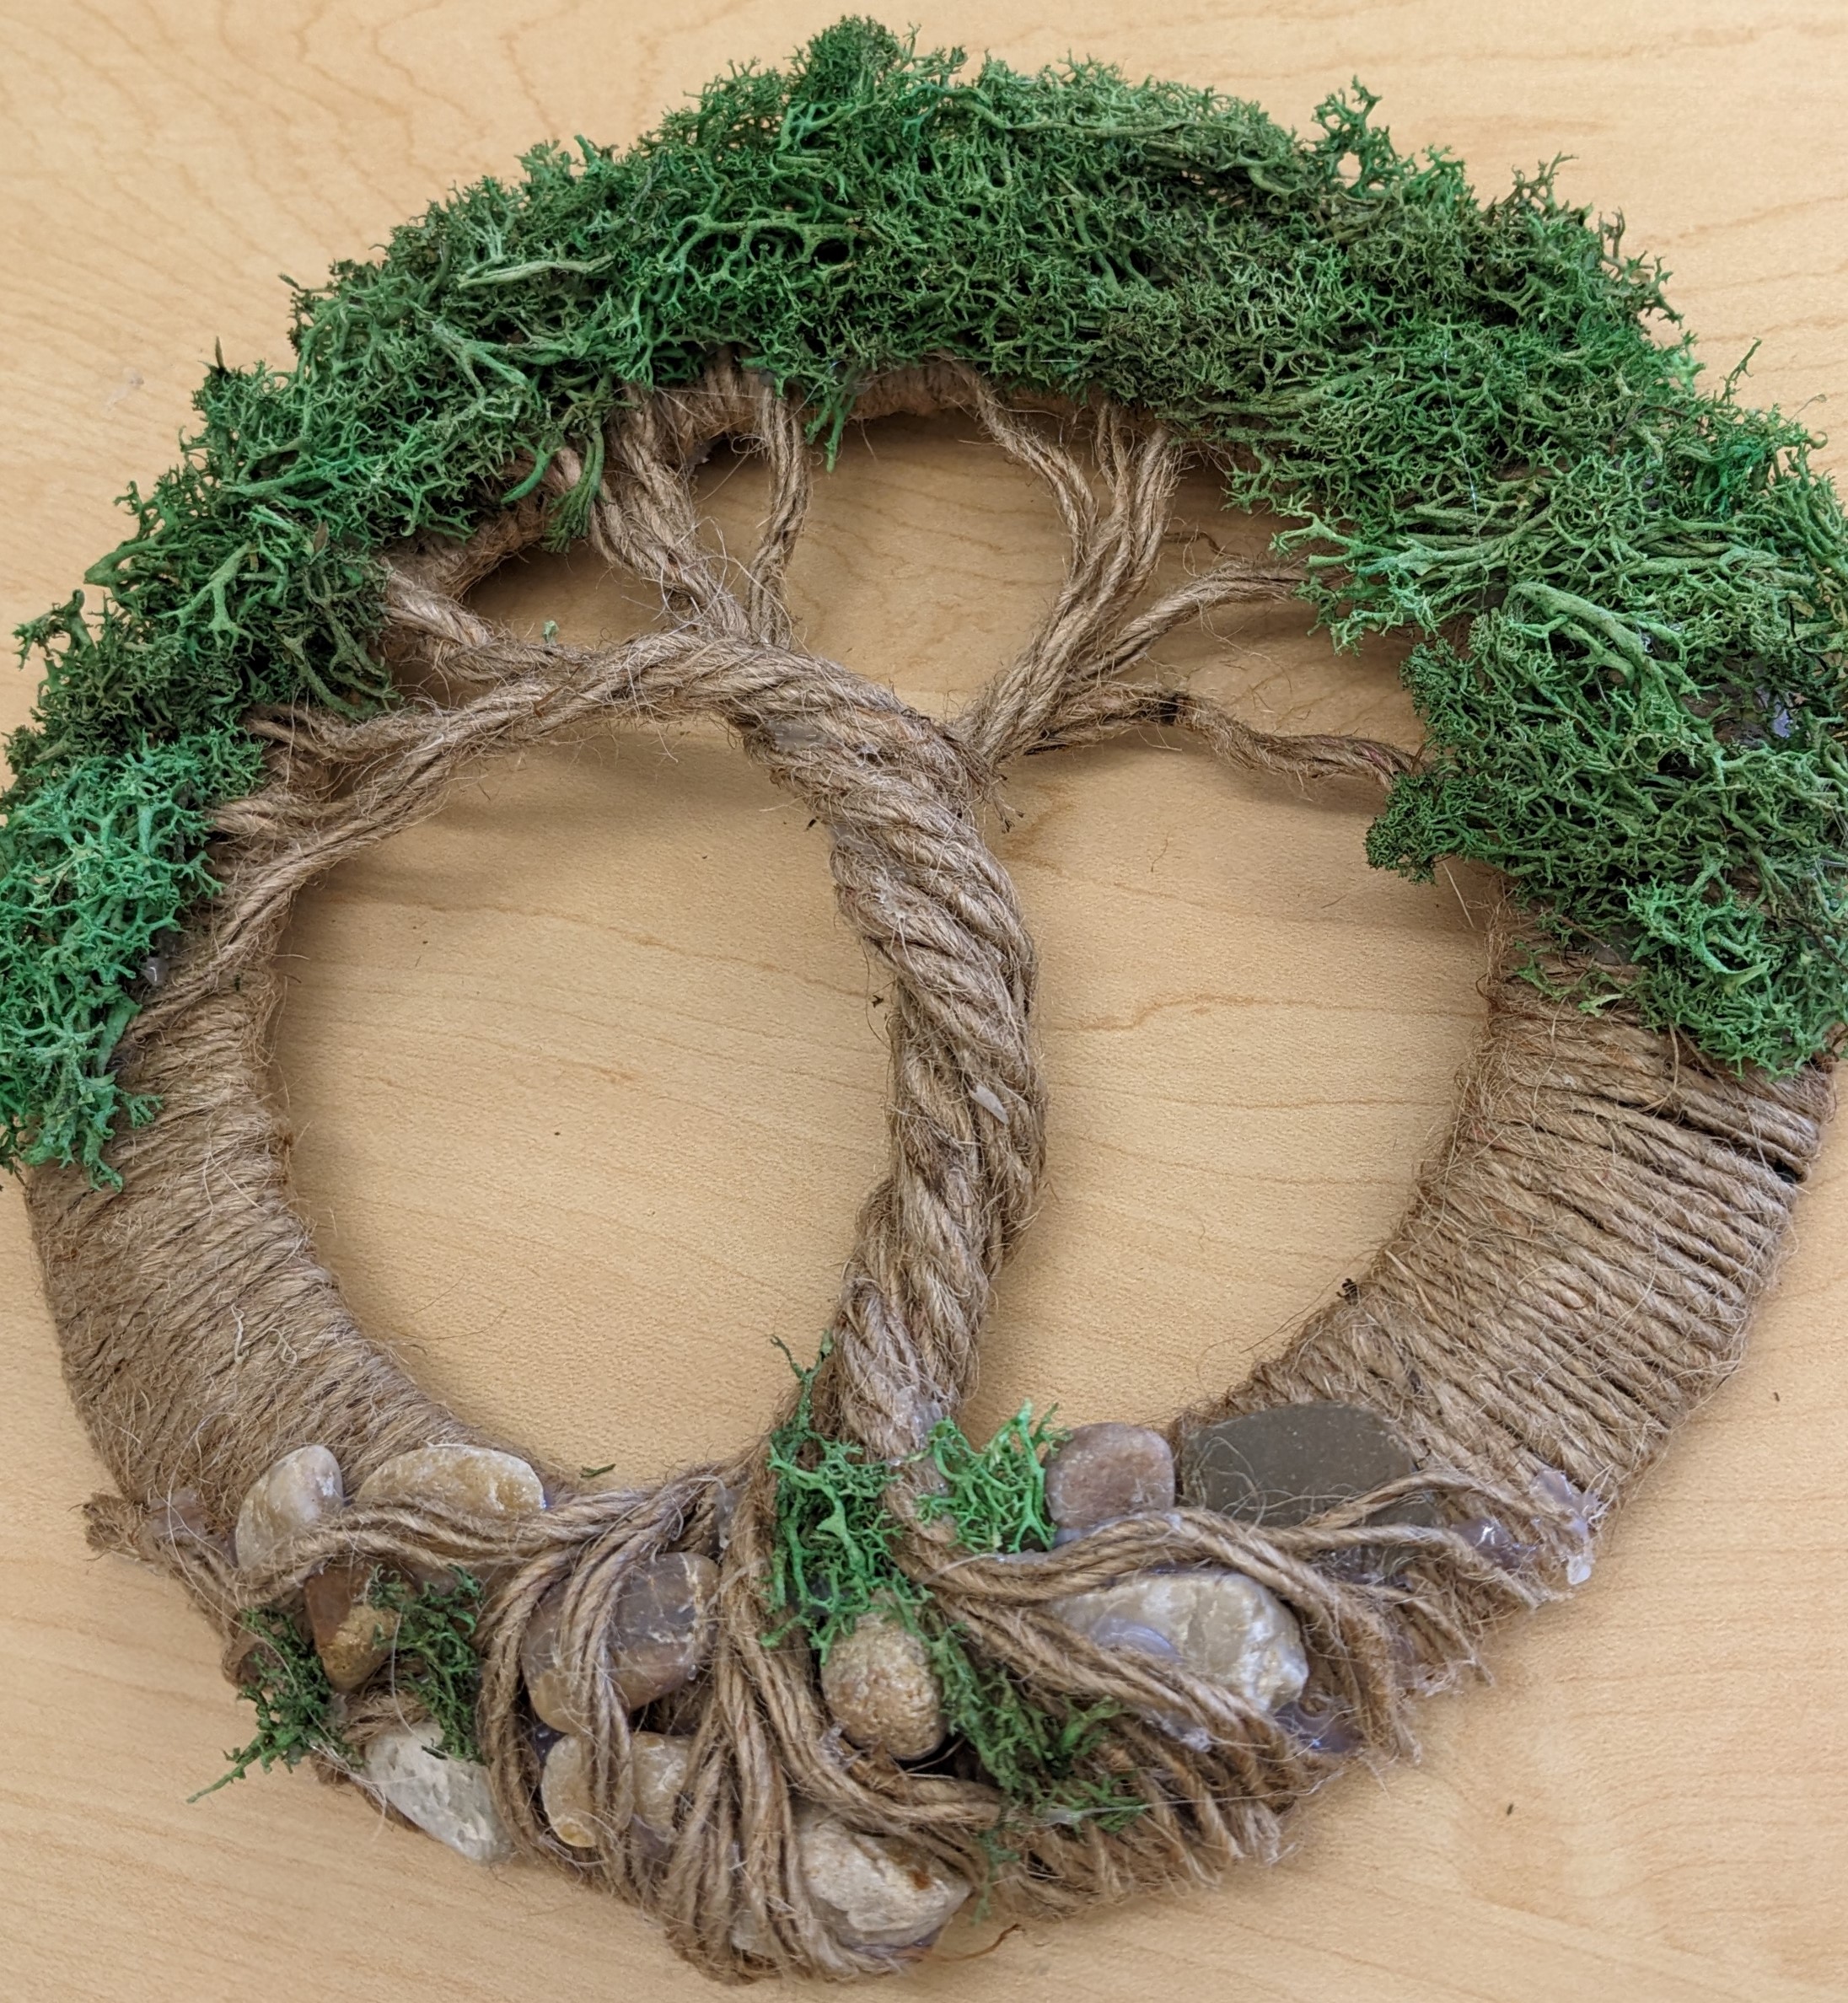 tree of life wreath made from twine and moss